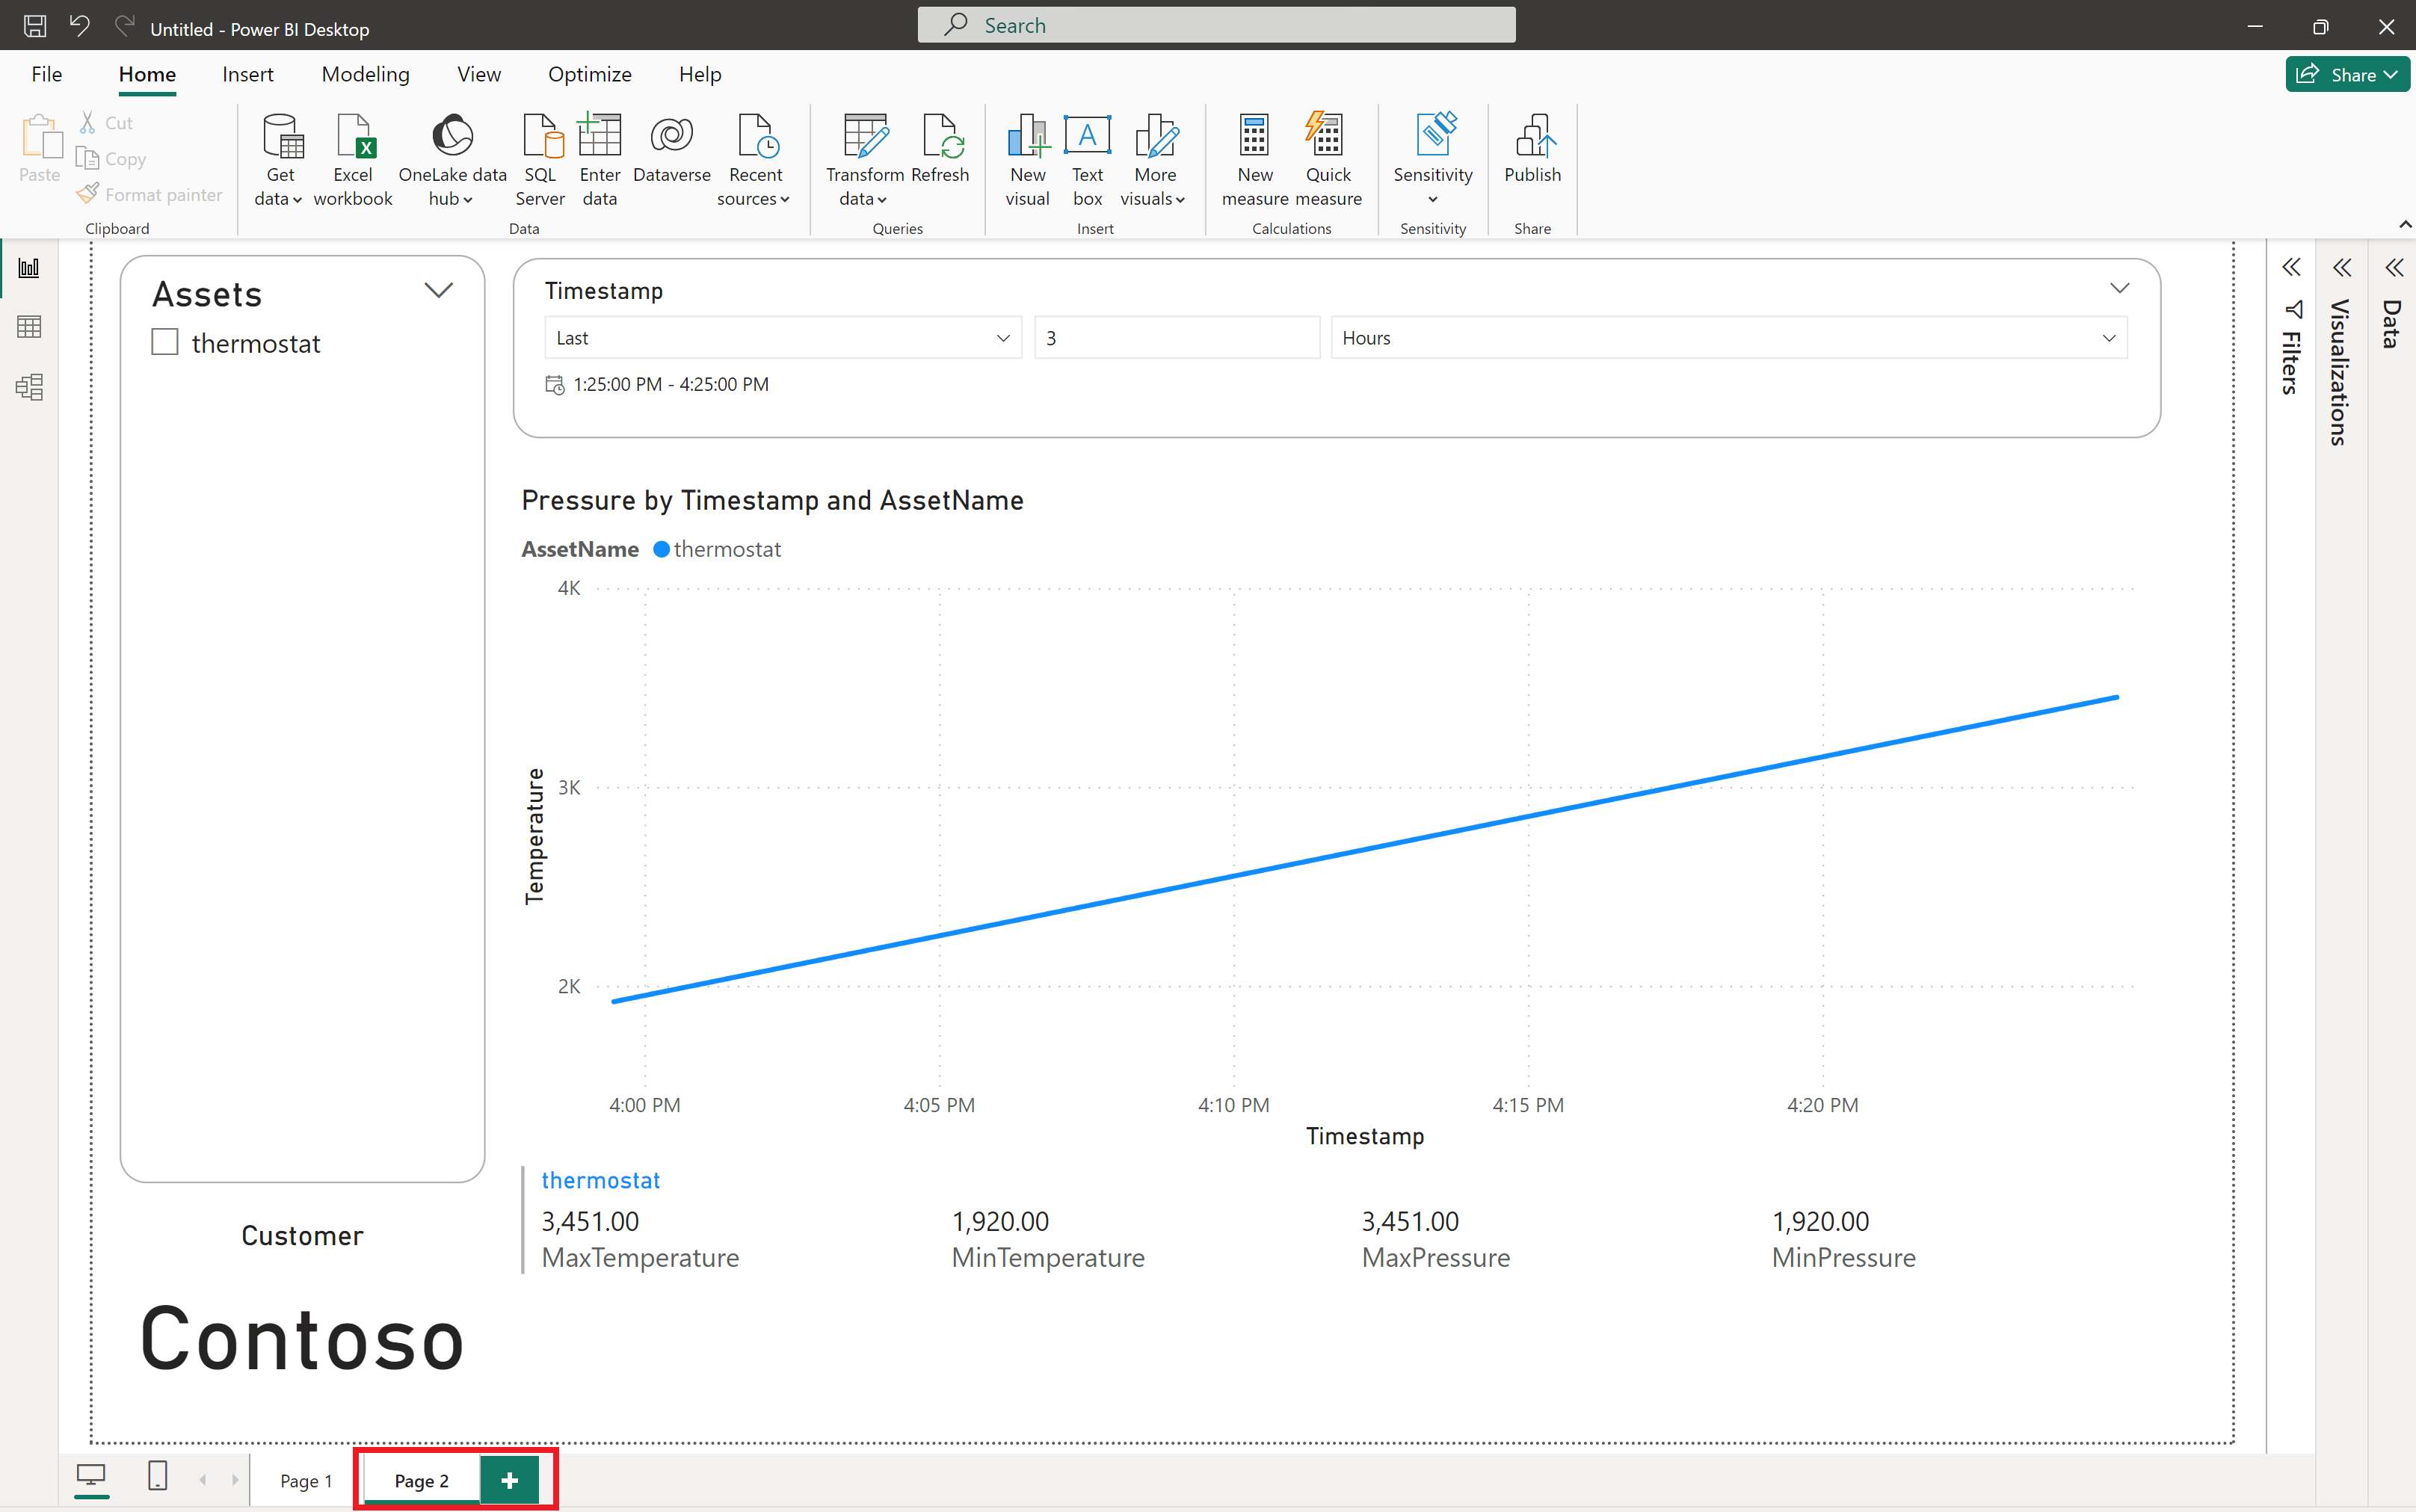 Screenshot of Power BI showing page 2 of the report view.